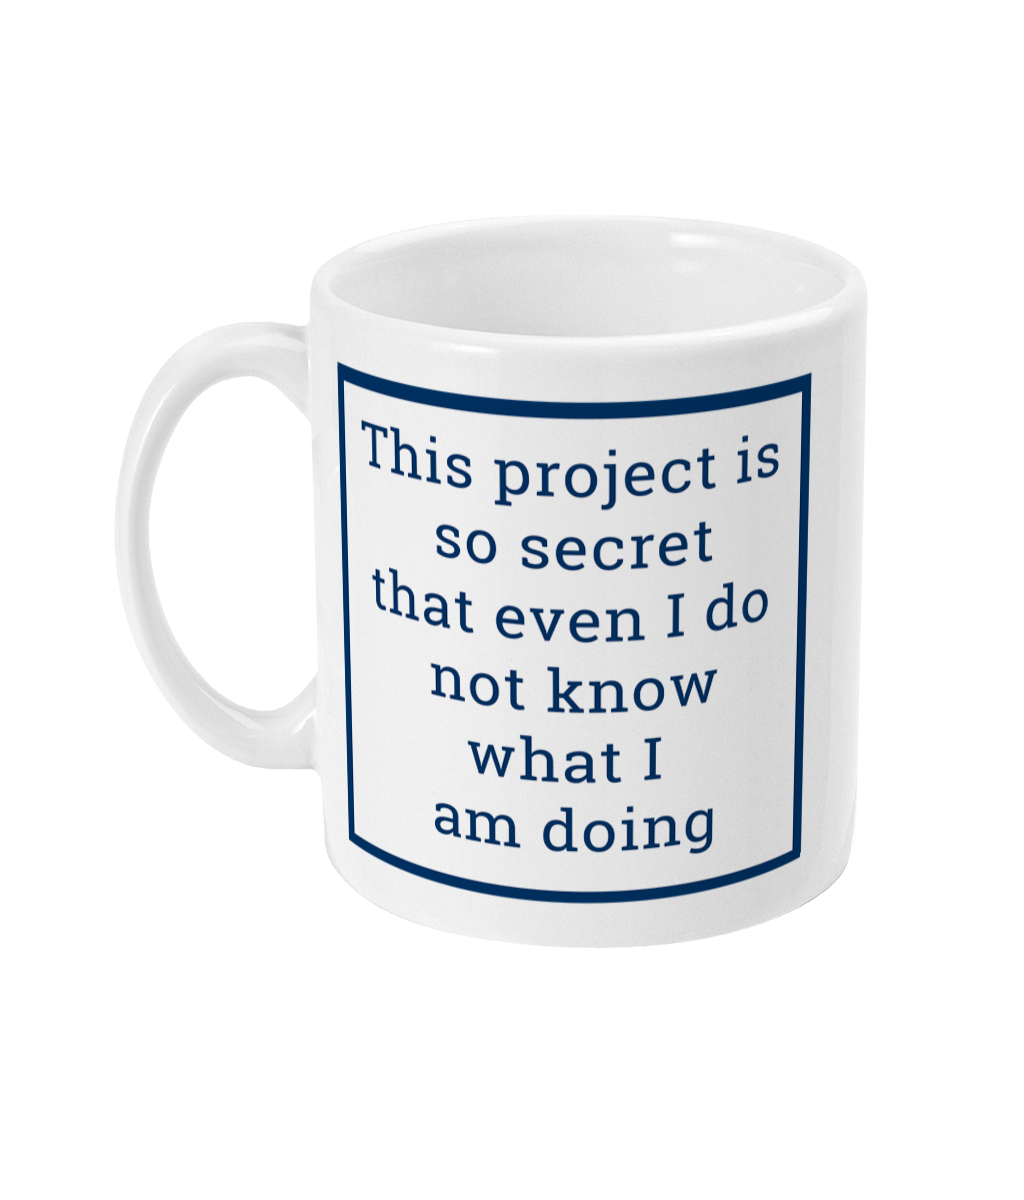 mug with this project is so secret that even I do not know what I am doing